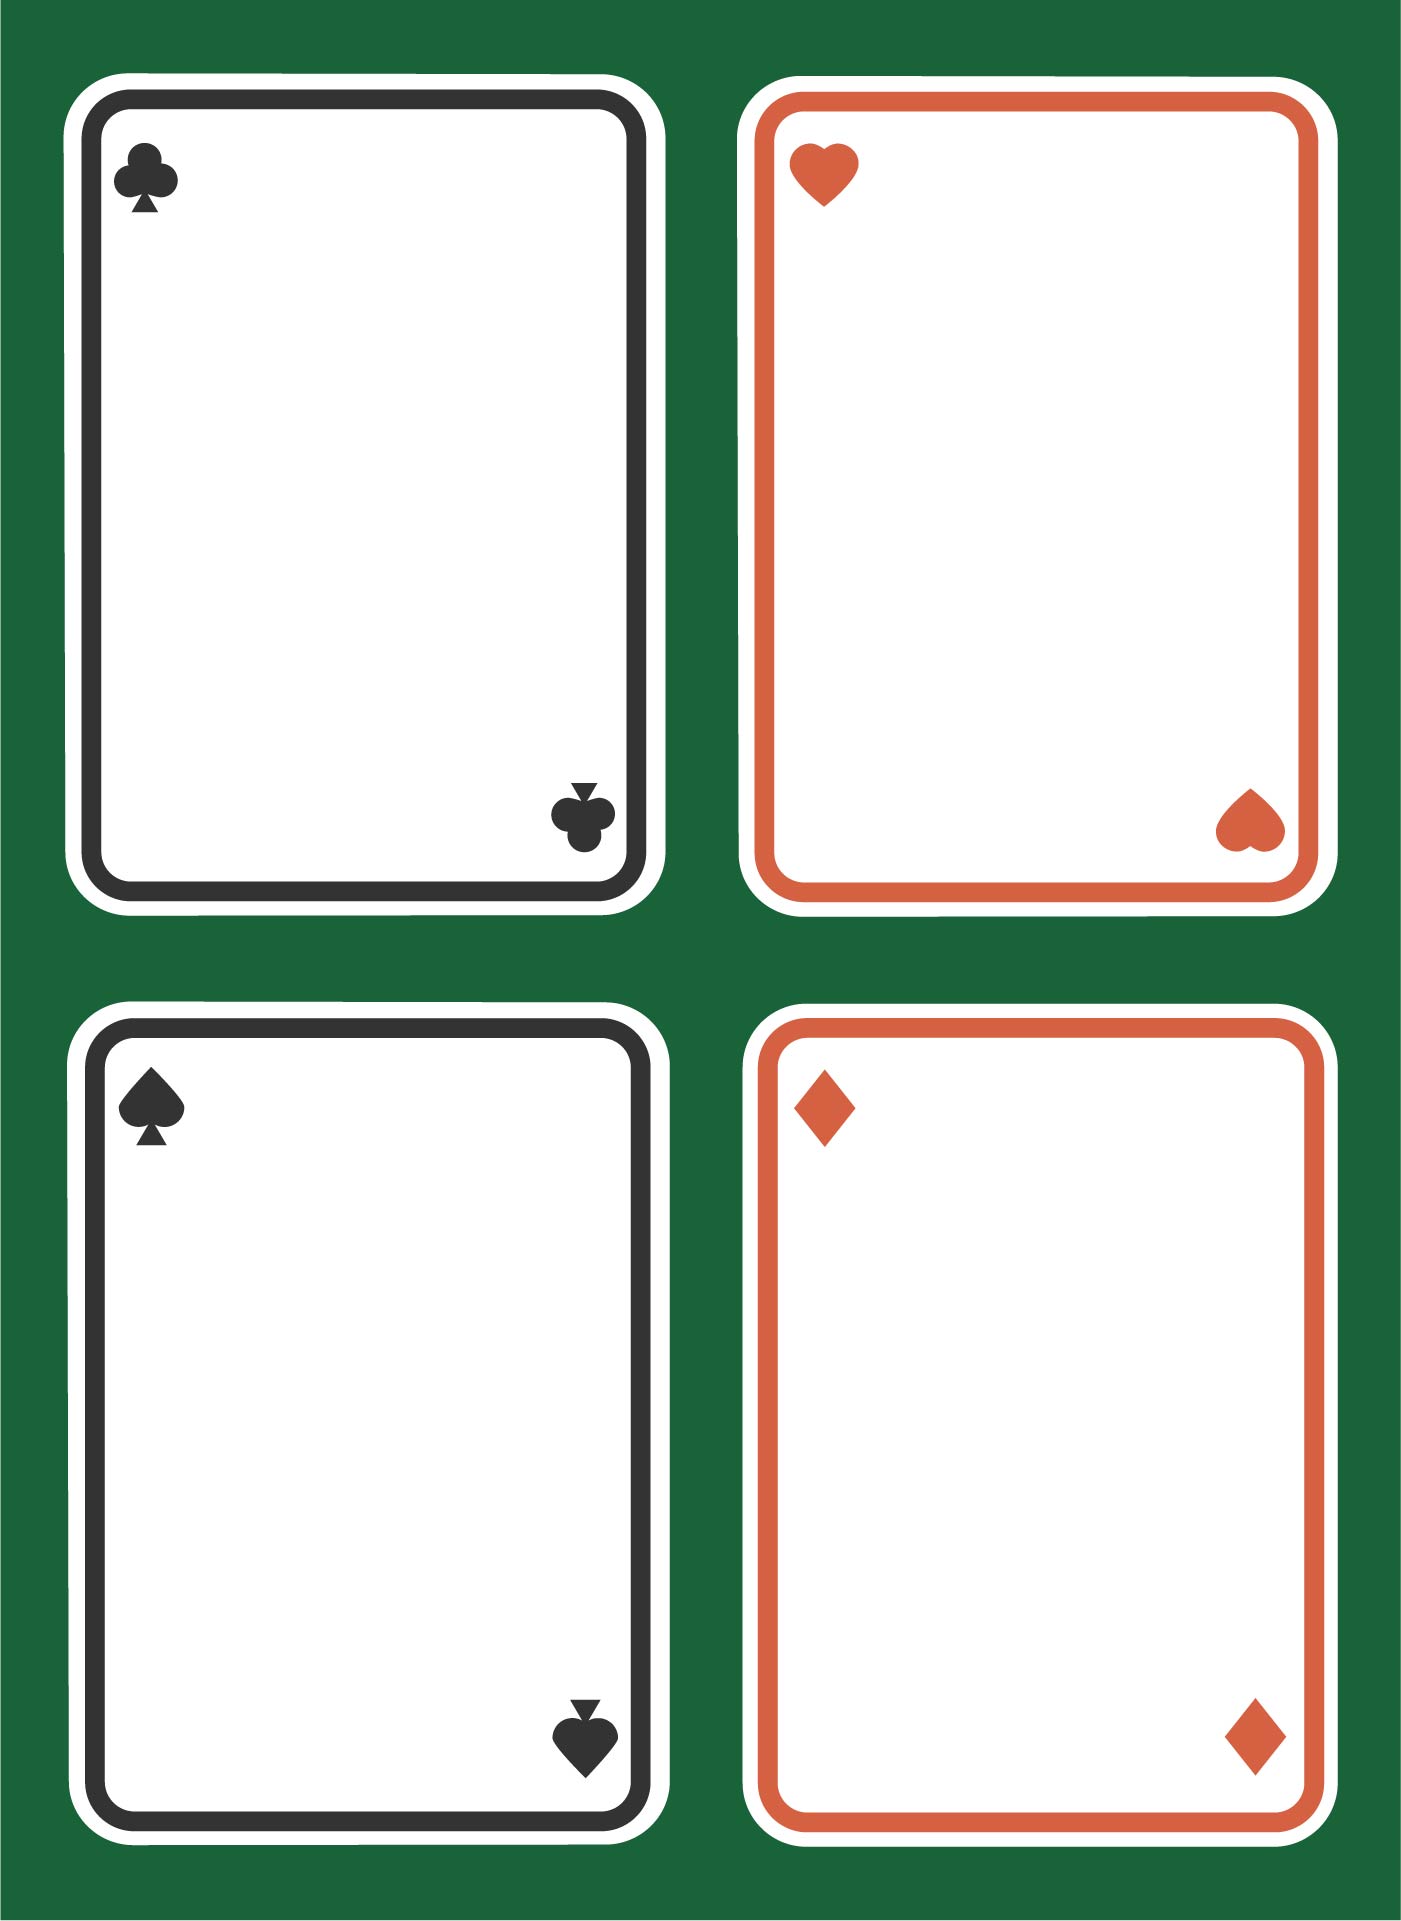 7-best-images-of-blank-printable-game-cards-blank-game-board-cards